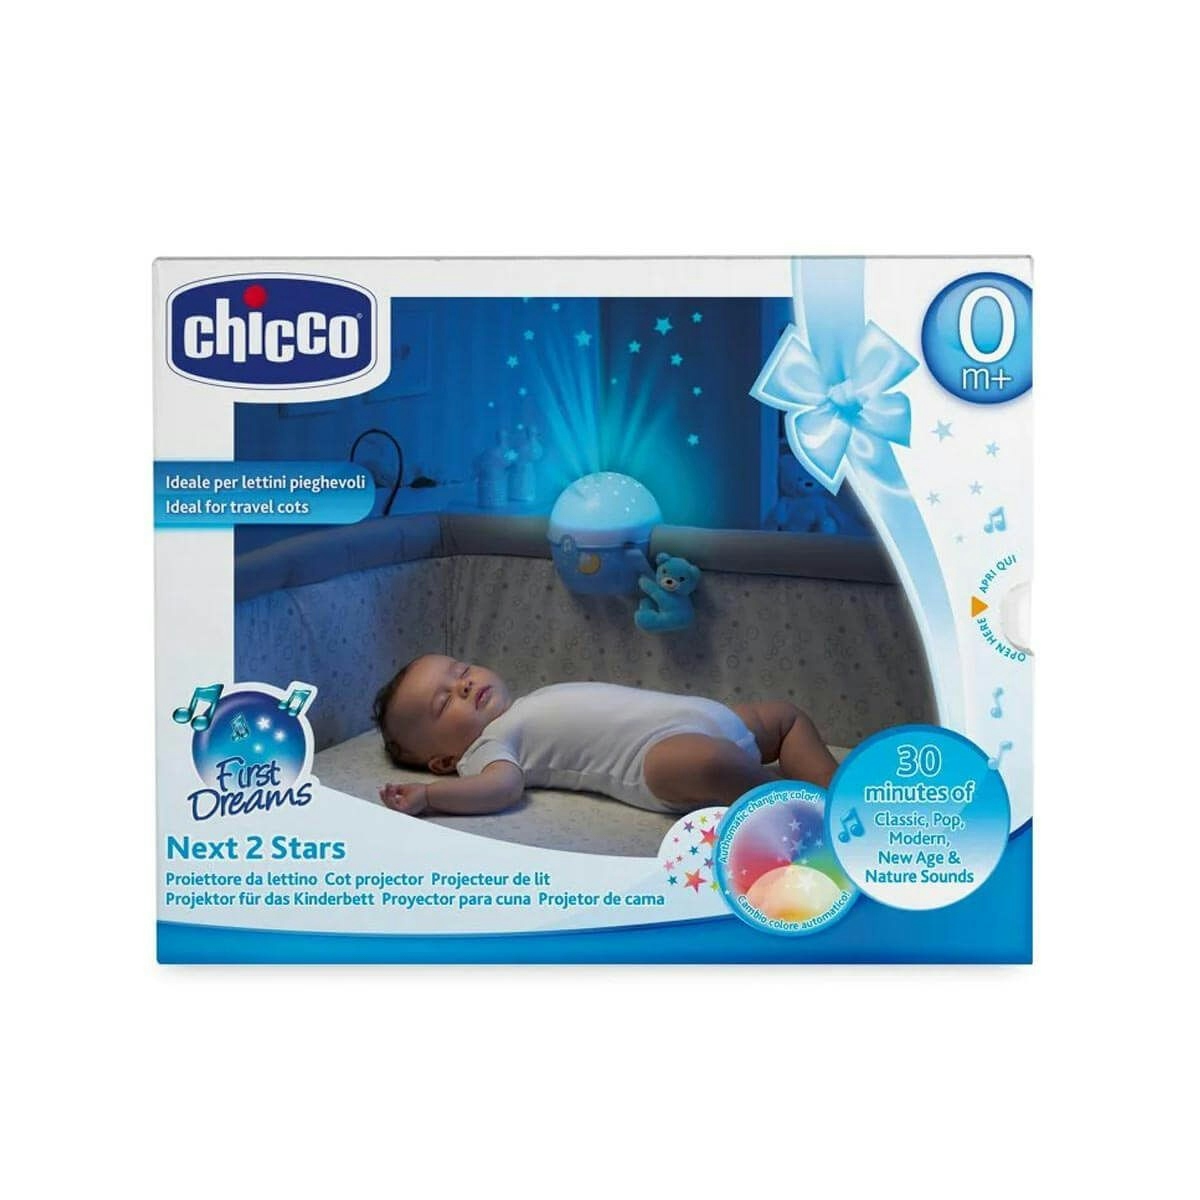 CHICCO Φωτεινός Προβολέας Κούνιας First Dreams Blue